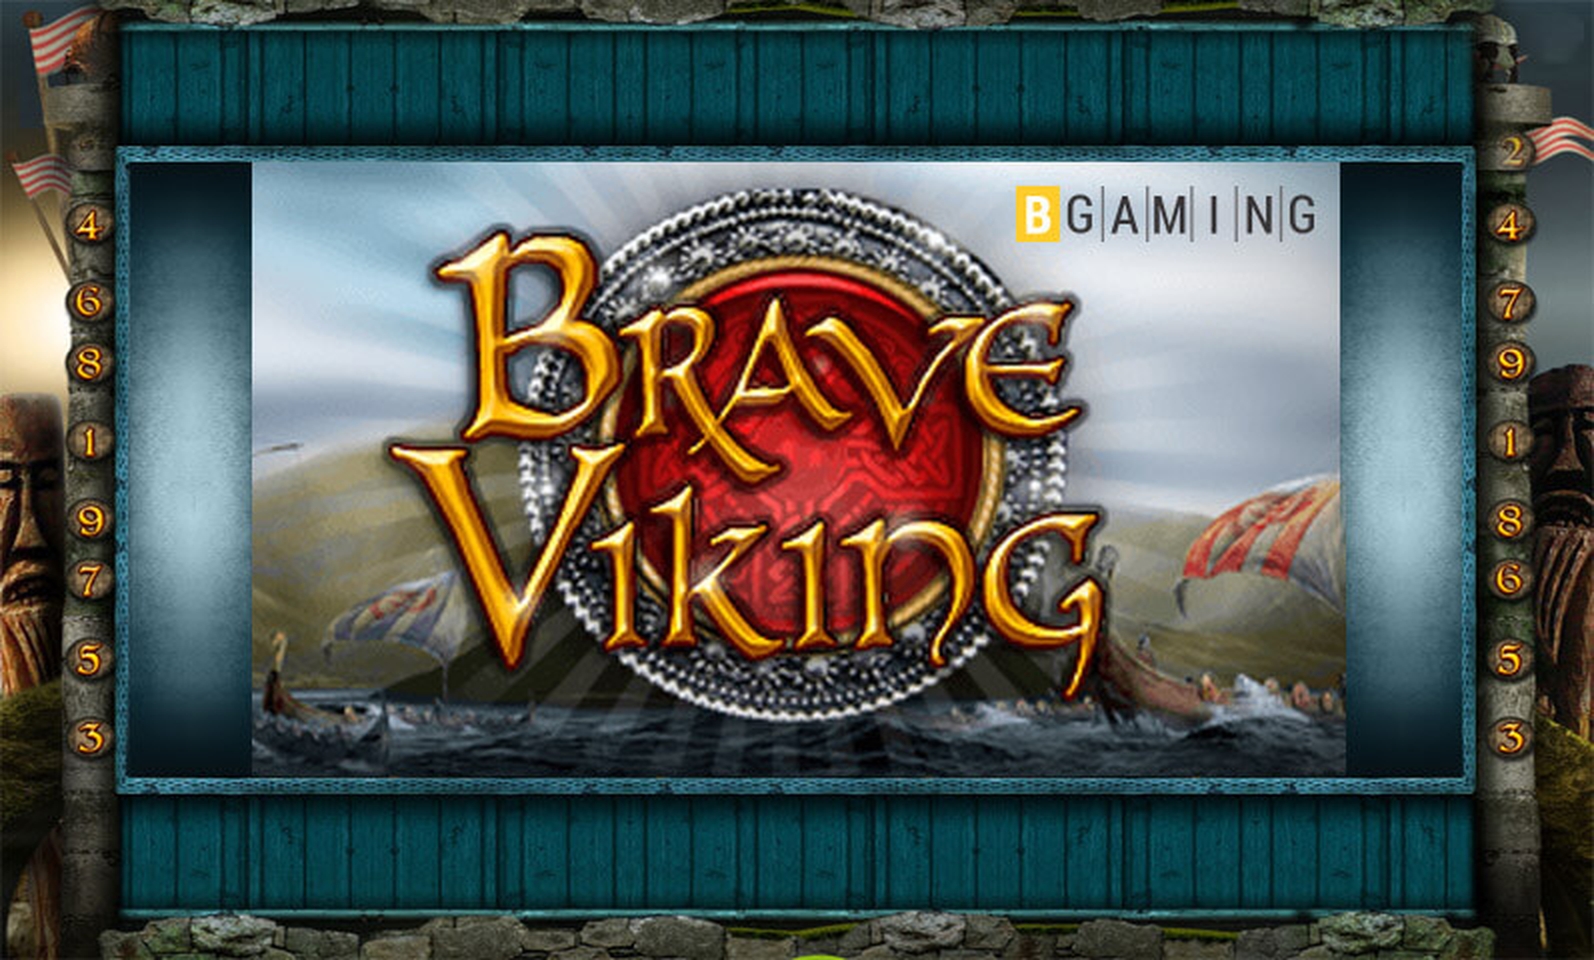 The Brave Viking Online Slot Demo Game by BGAMING